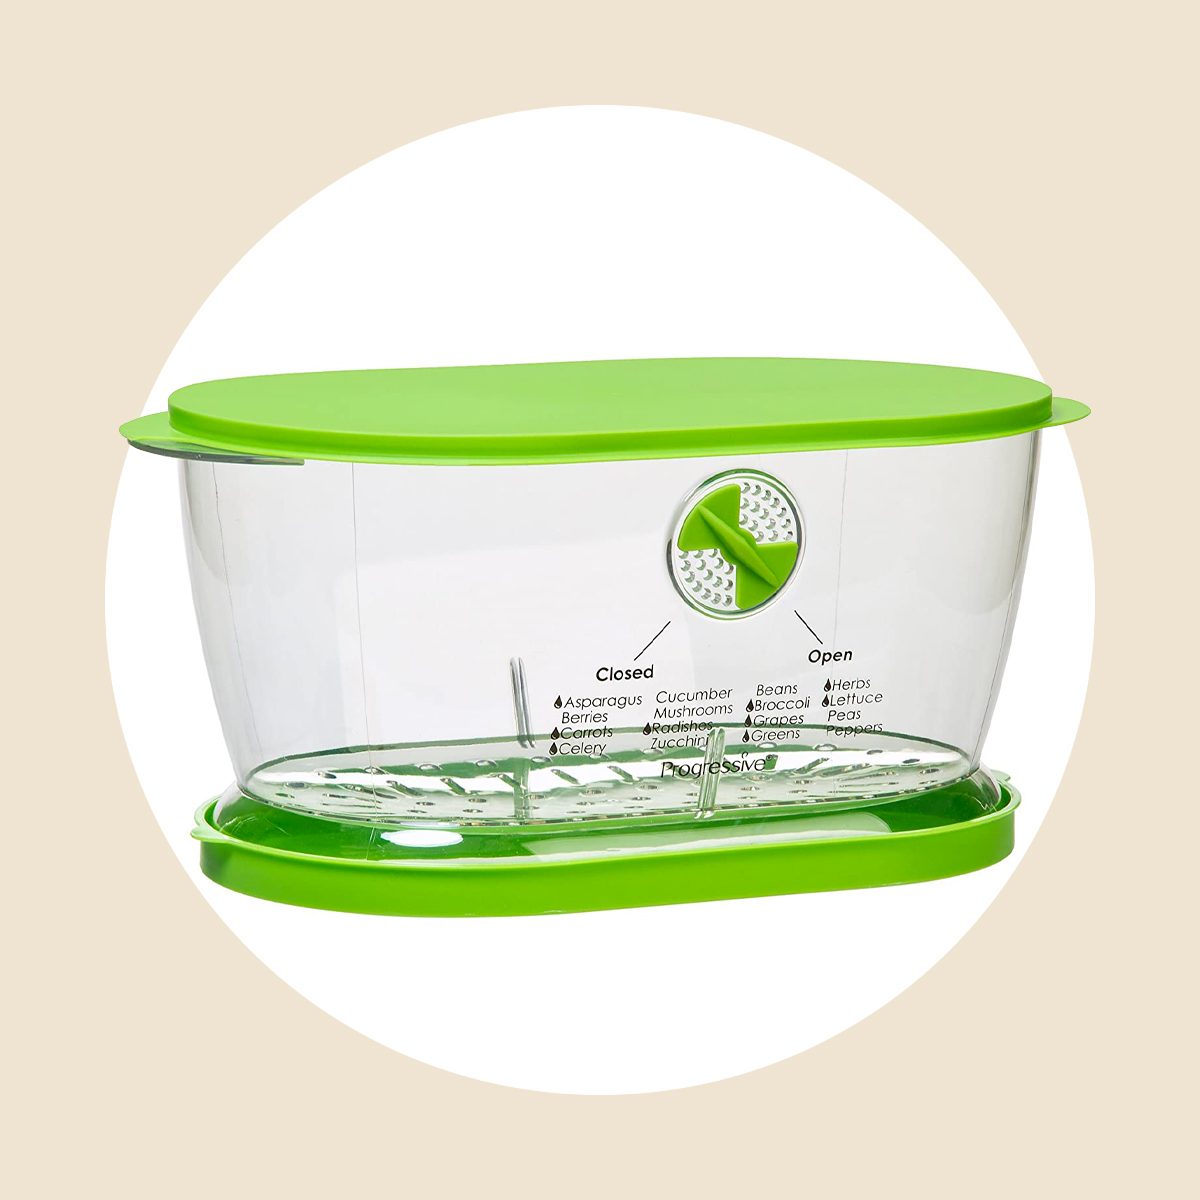 https://www.tasteofhome.com/wp-content/uploads/2019/05/Prep-Solutions-by-Progressive-Lettuce-Keeper-Produce-Storage-Container-ecomm-amazon.com_.jpg?fit=700%2C700